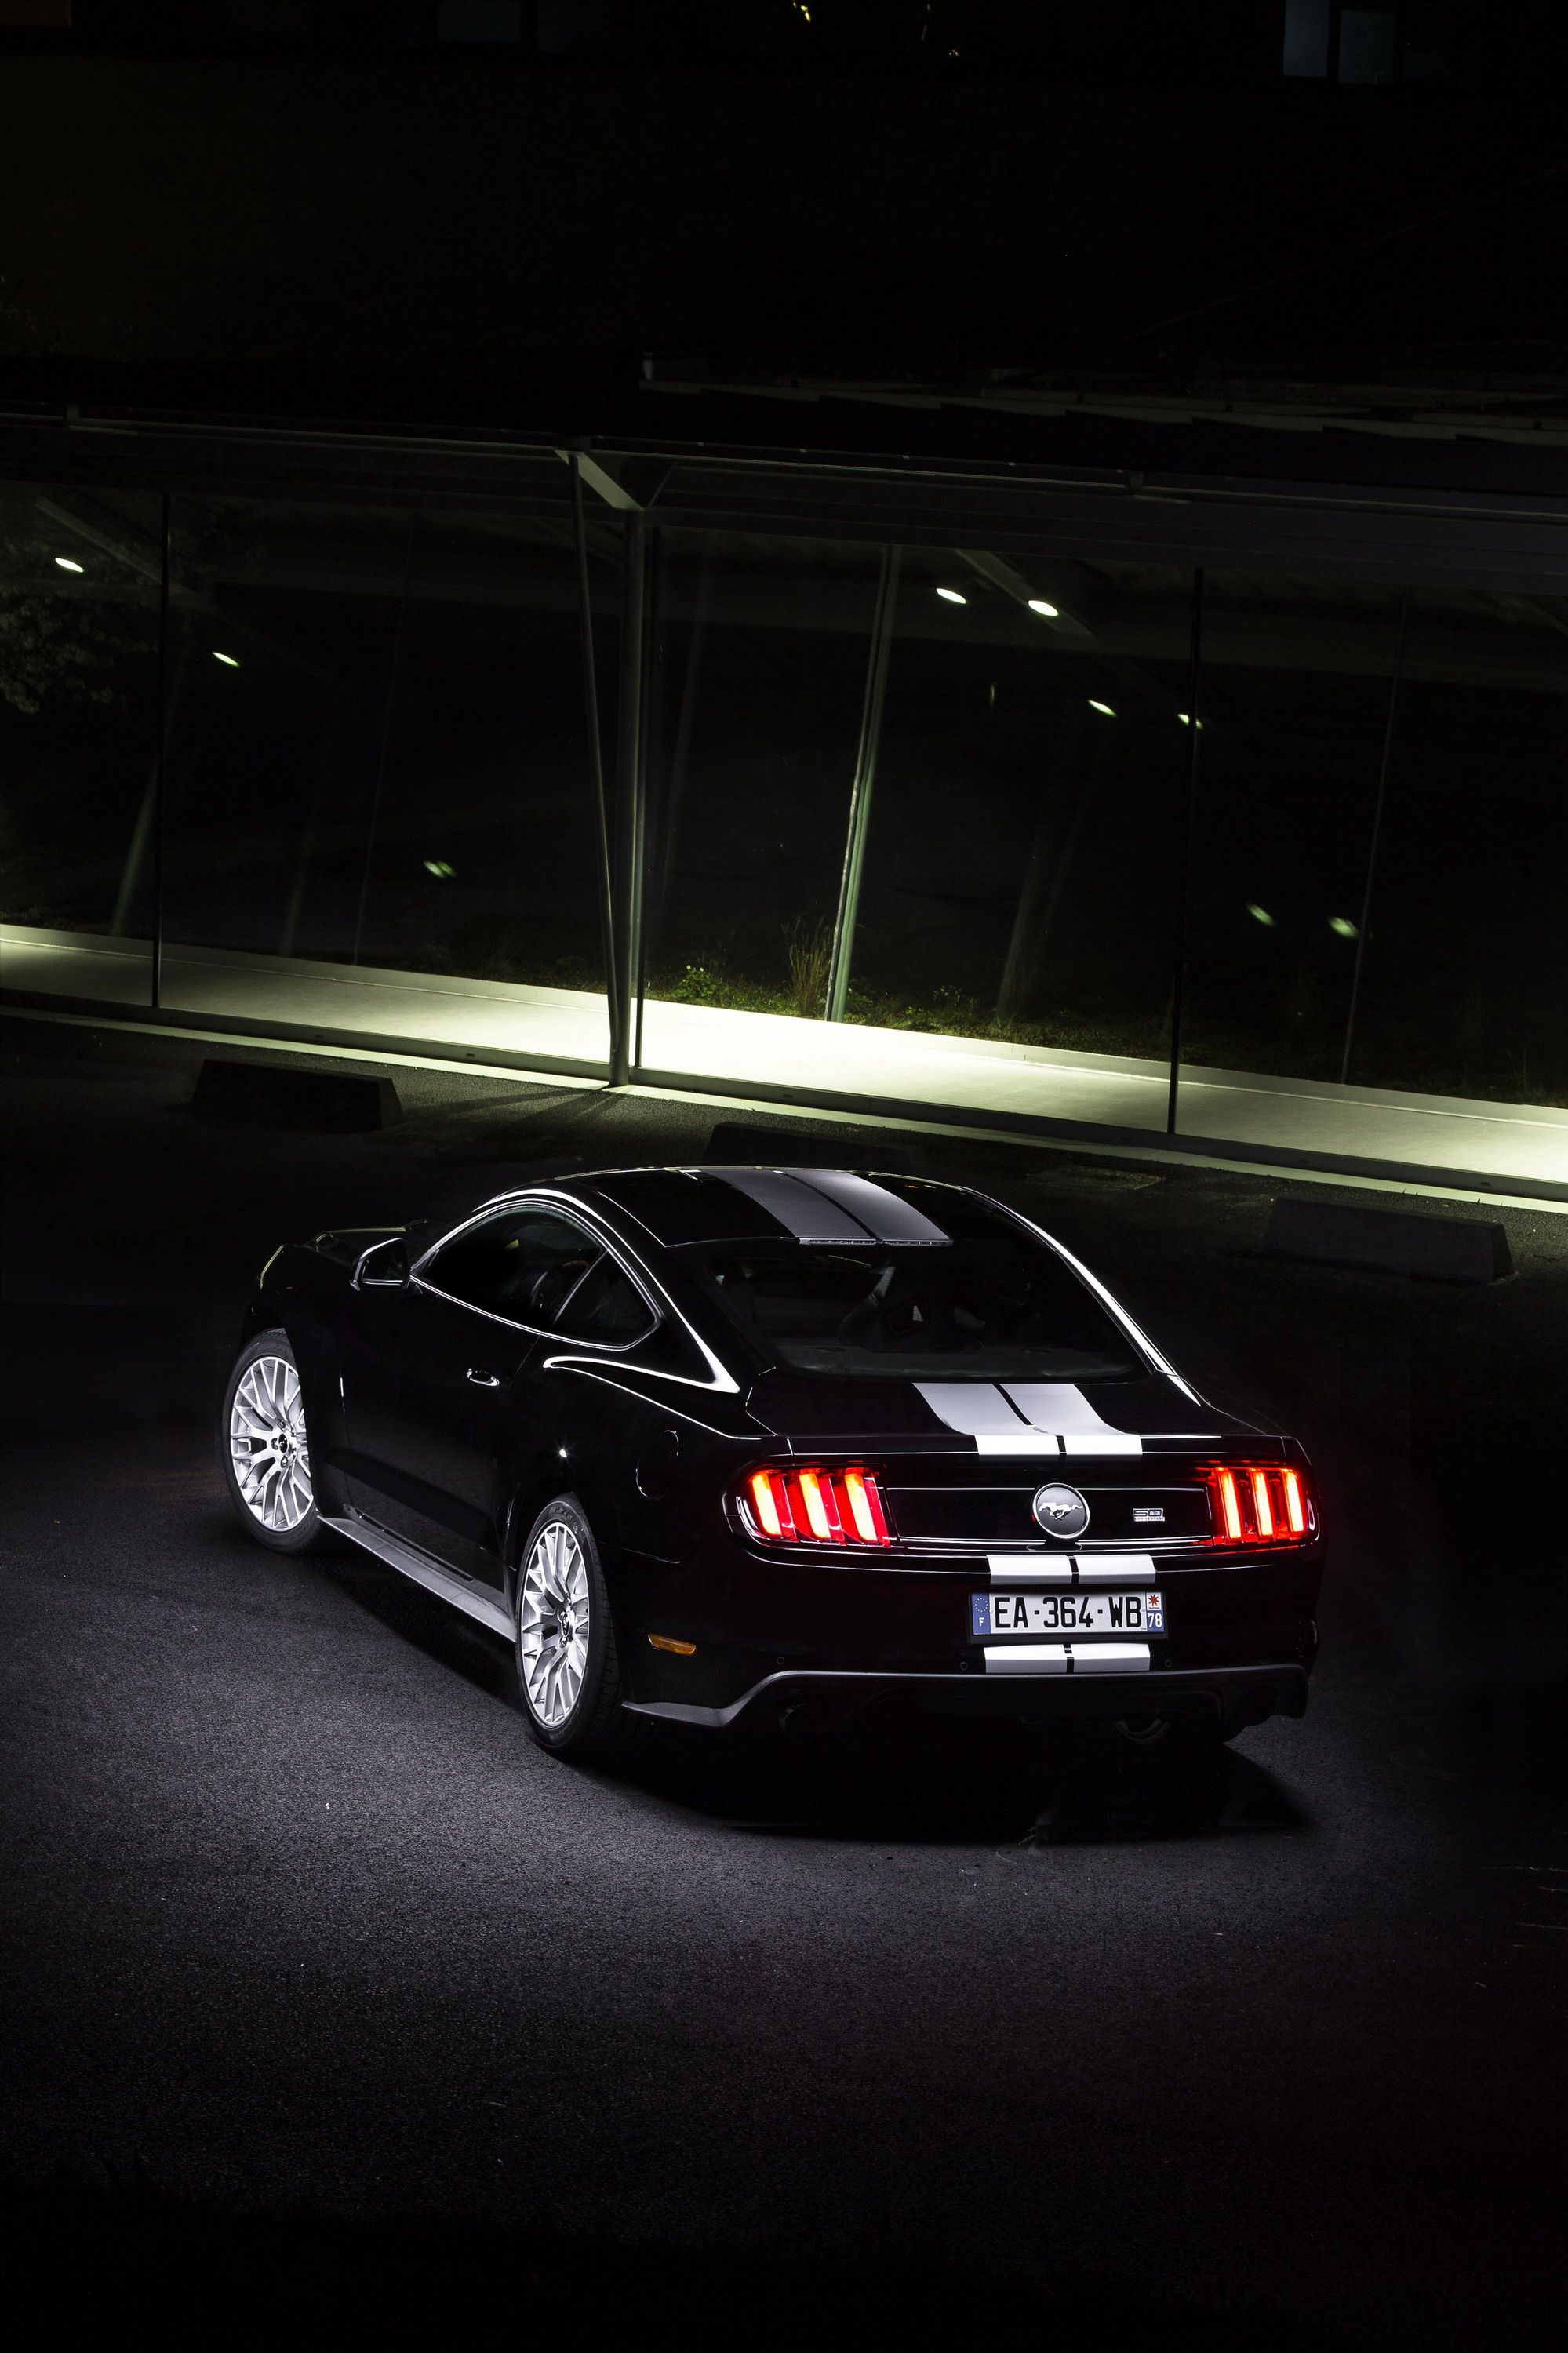 2016 Ford Mustang Le Mans 50th Anniversary Edition